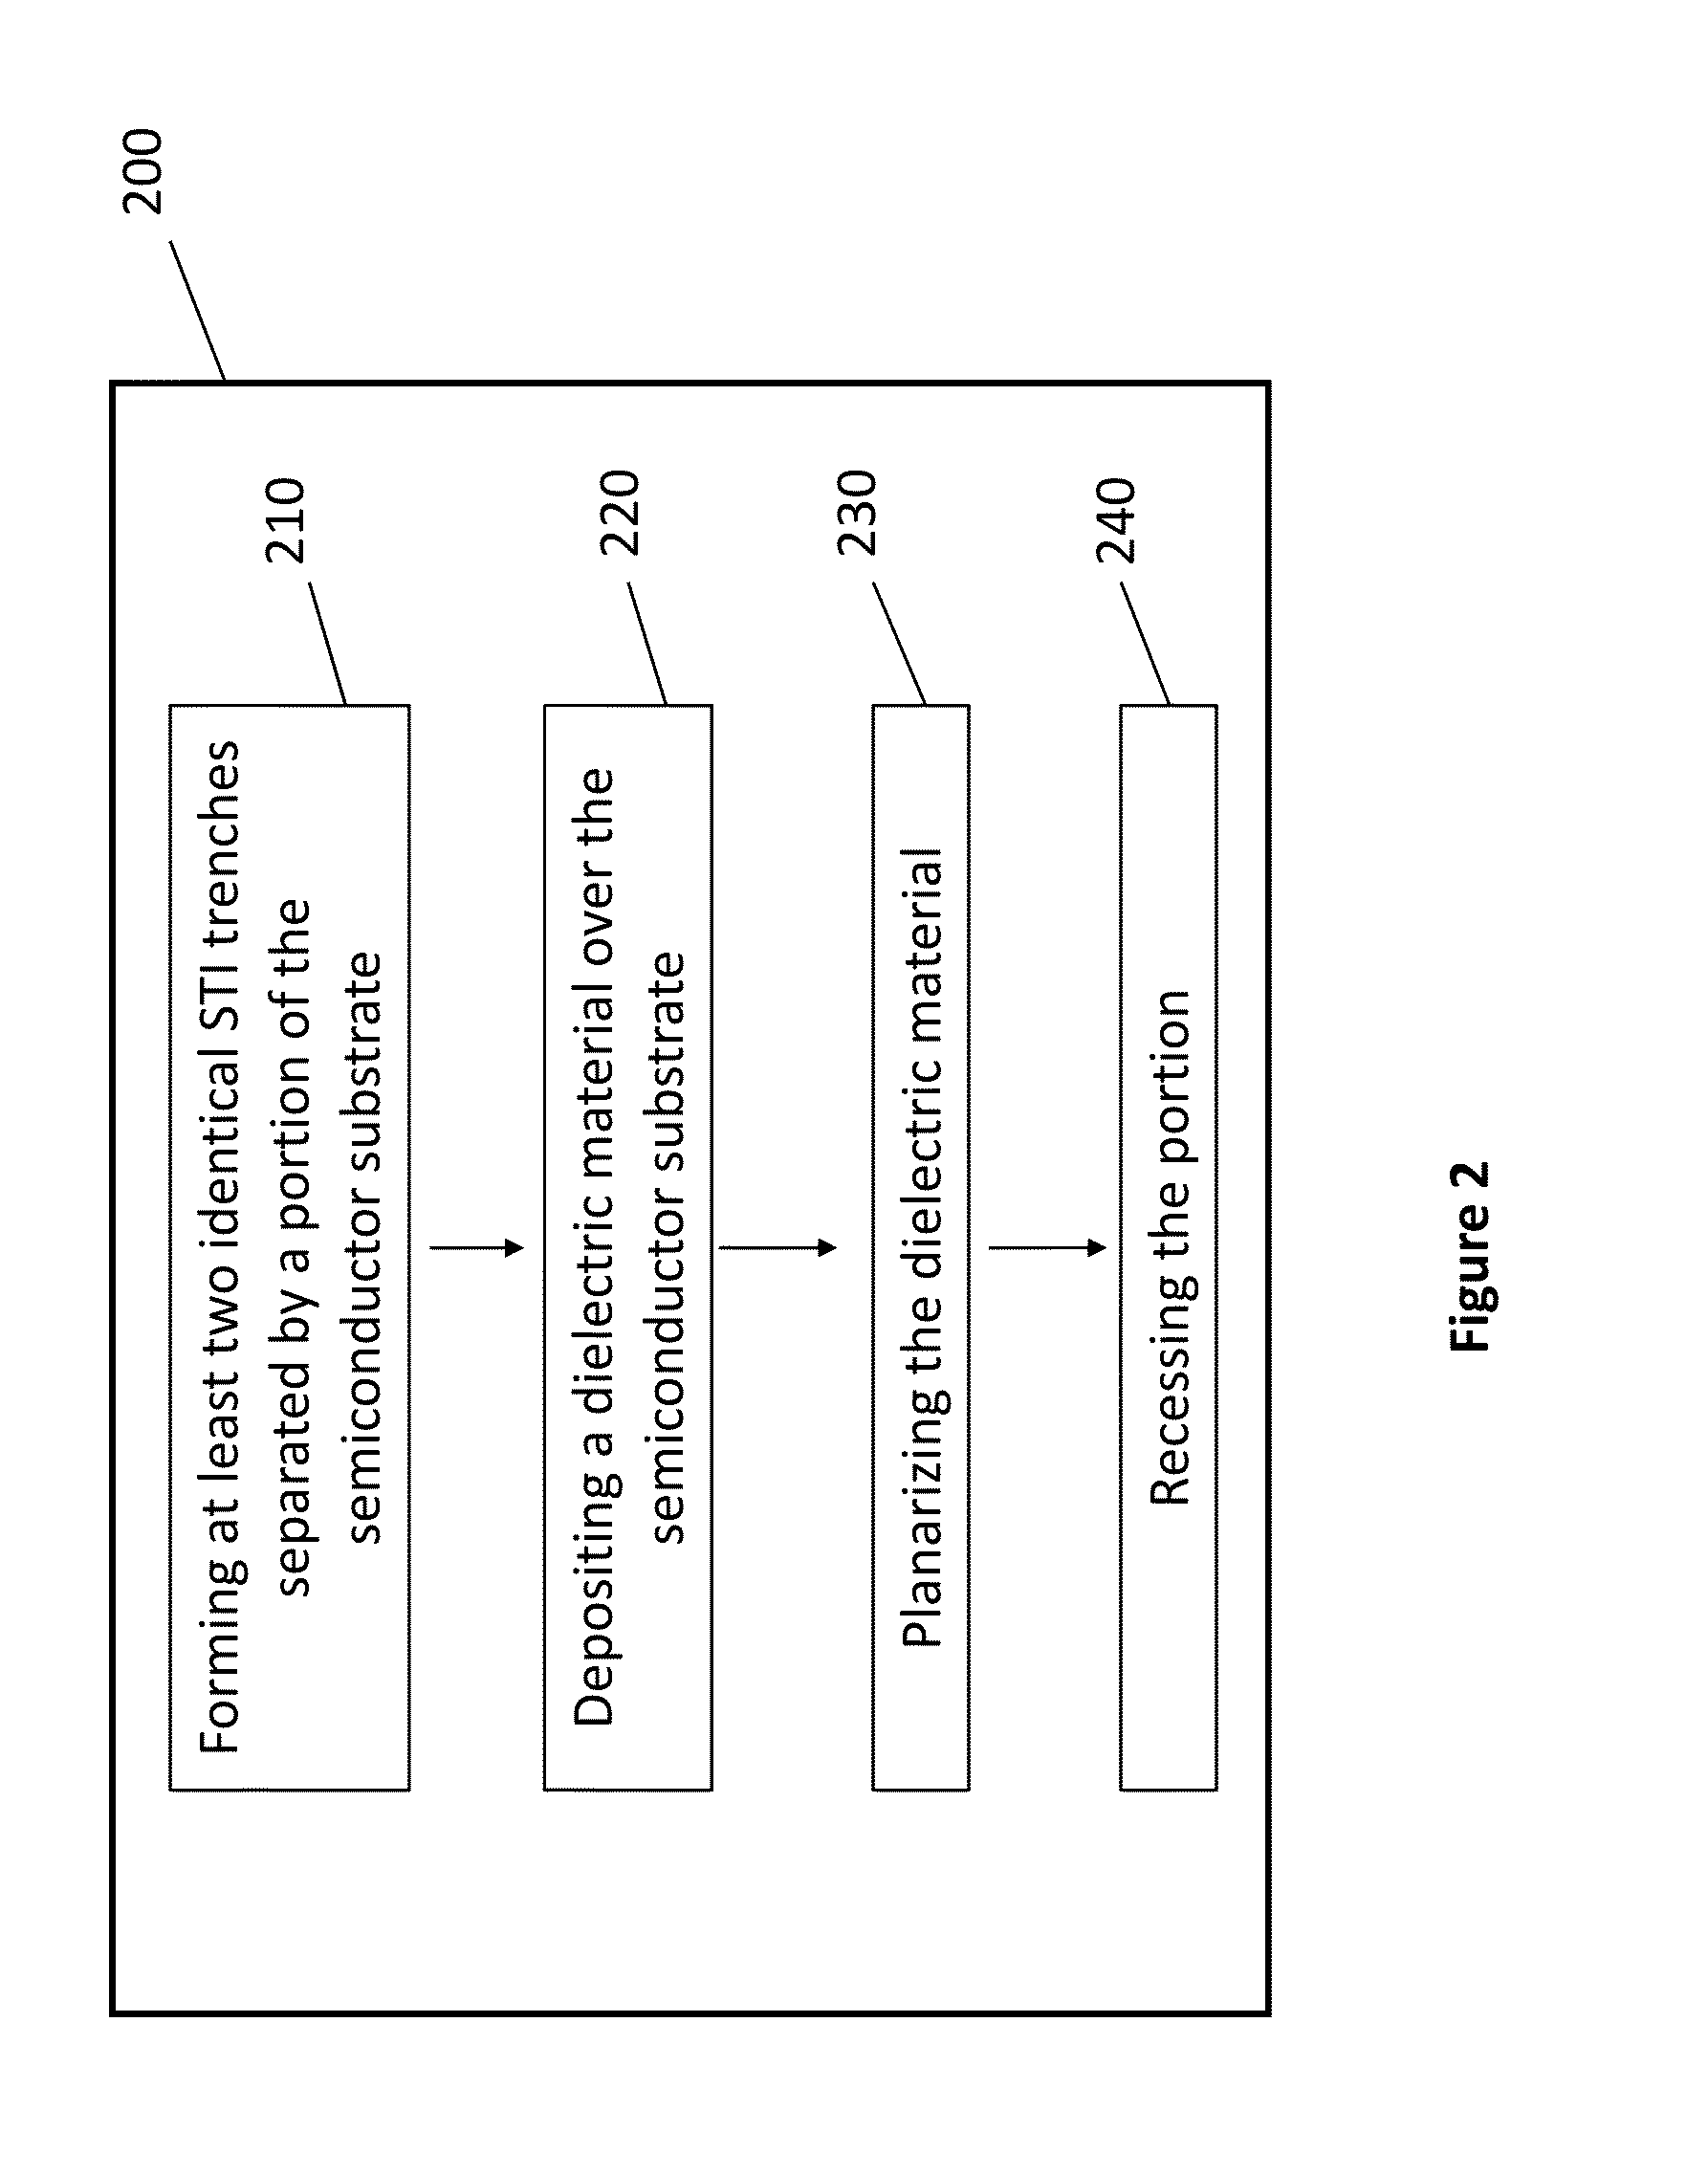 Method of Producing a III-V Fin Structure